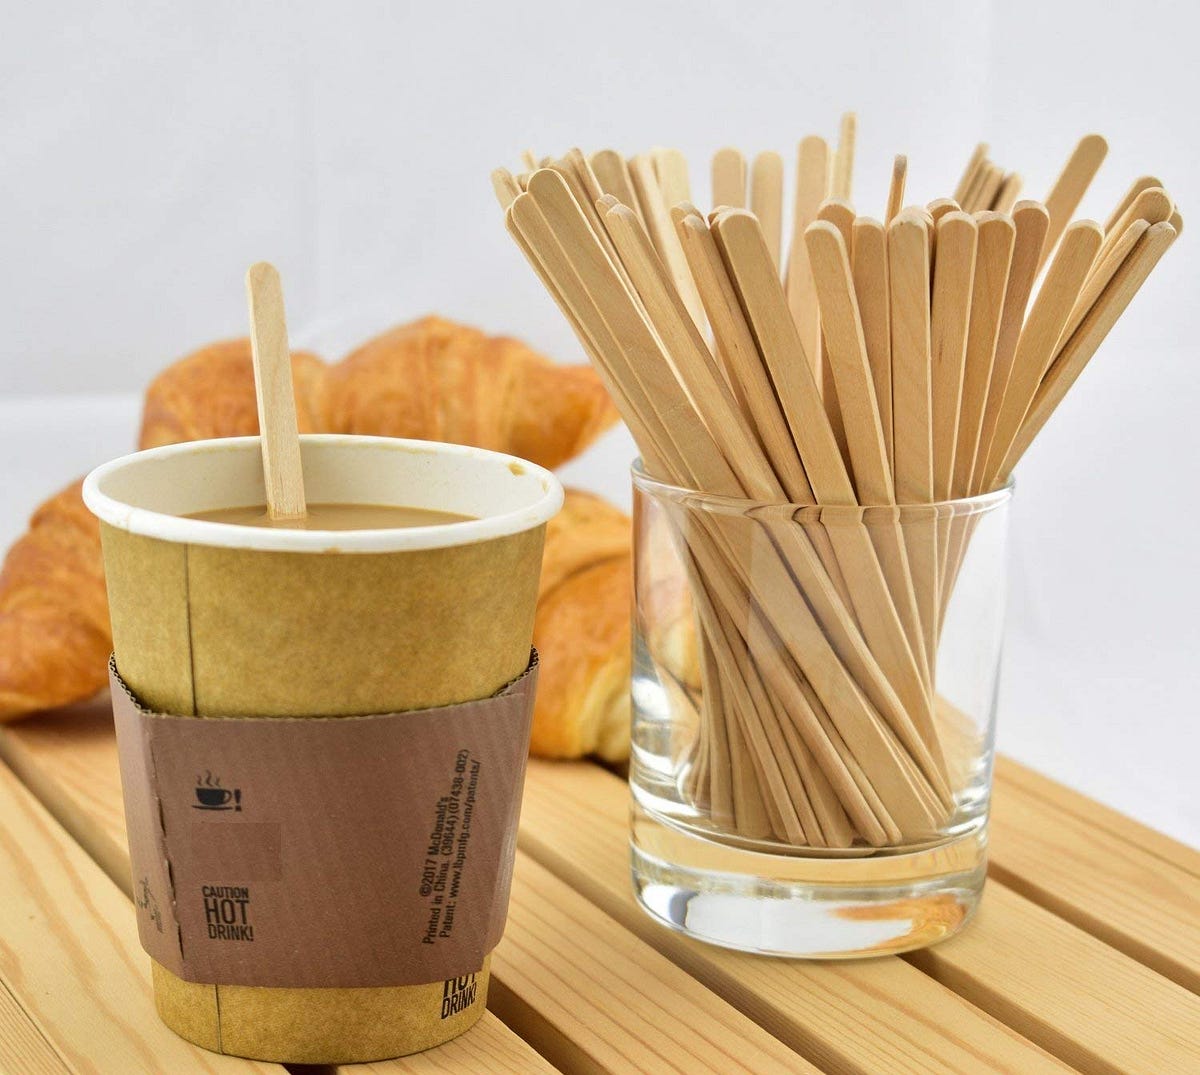 How to Choose the Best Quality Disposable Wooden Coffee Stirrer?, by TAG  INGREDIENTS INDIA PVT LTD